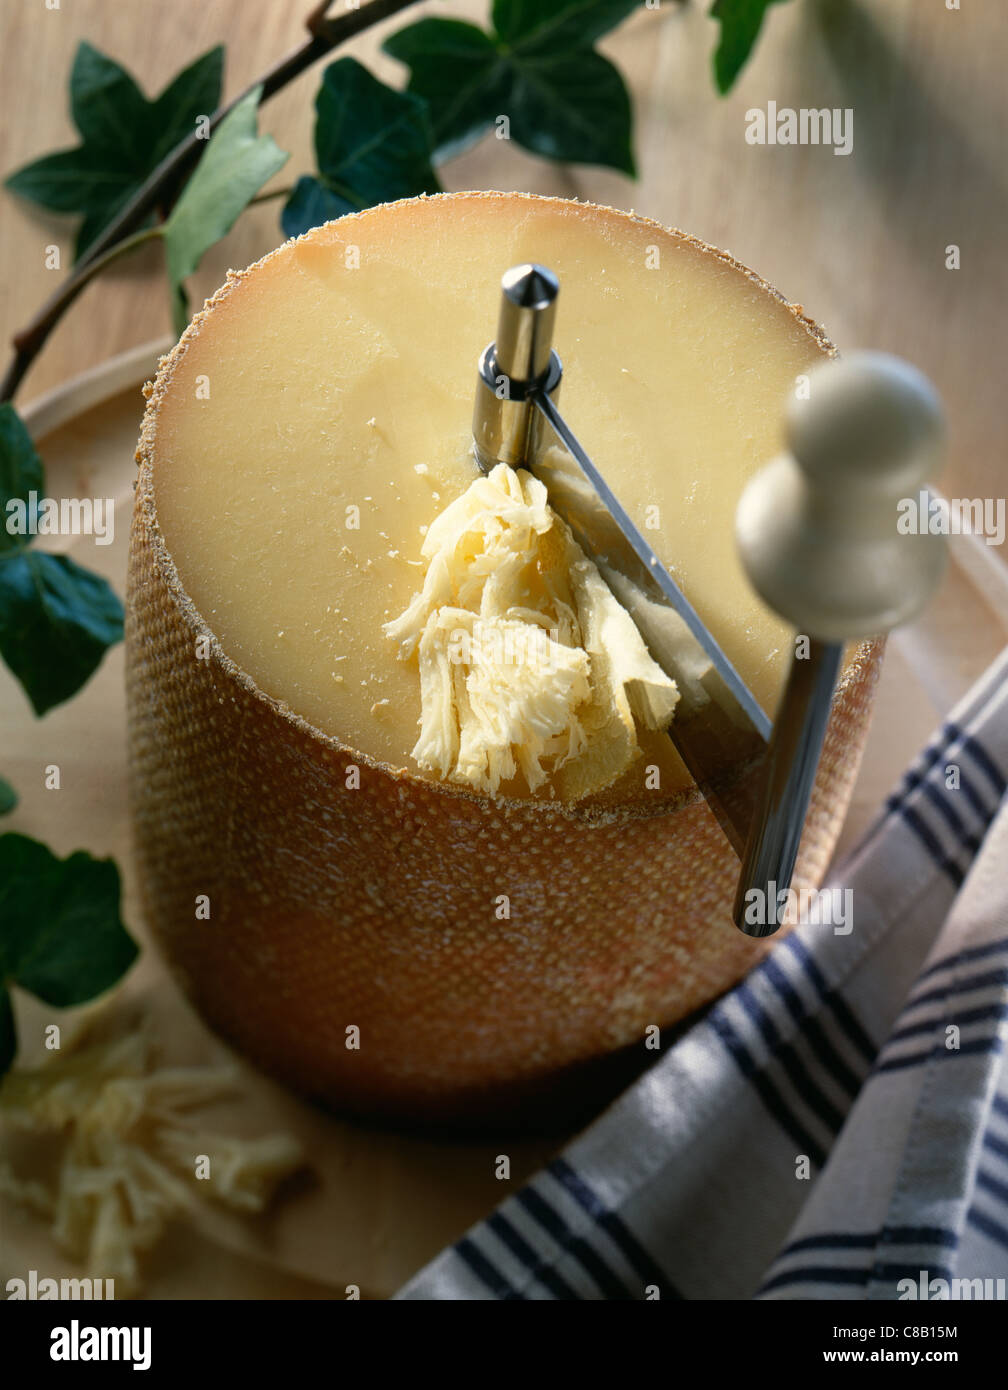 Cheese and Girolle cheese shaver Stock Photo - Alamy